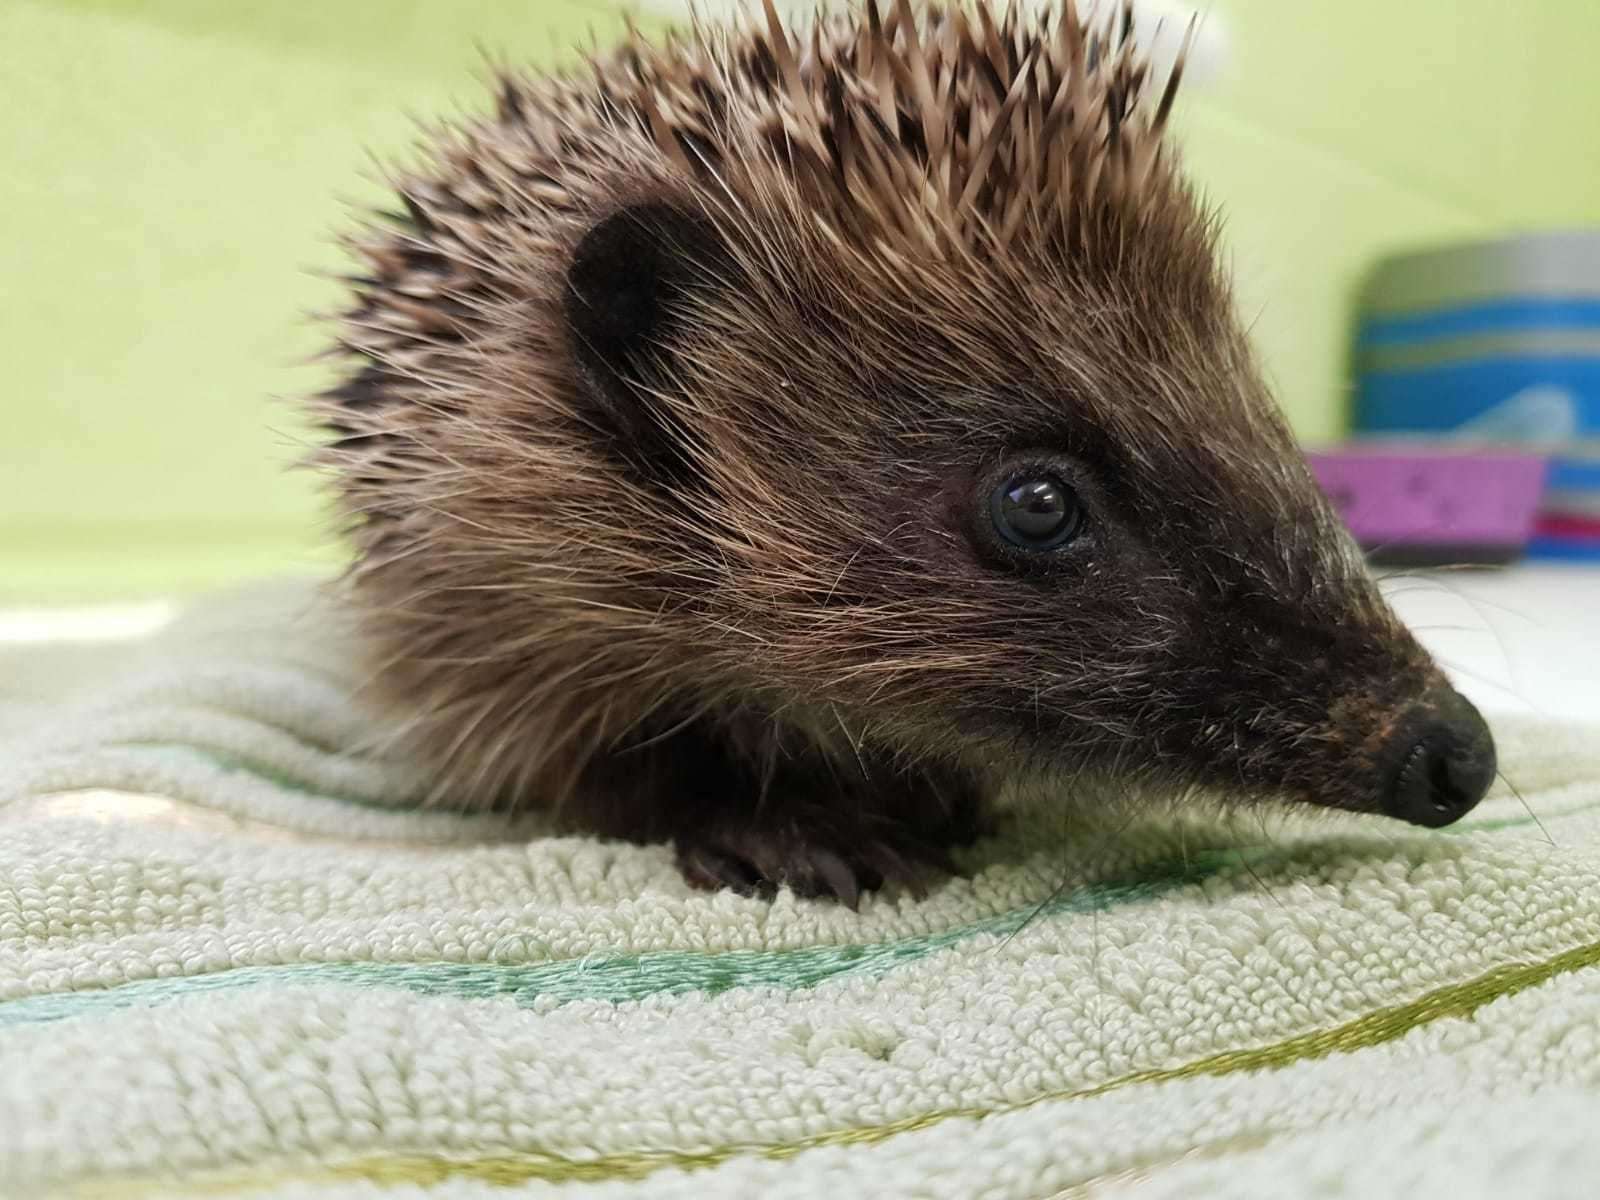 One of the hedgehogs being cared for.